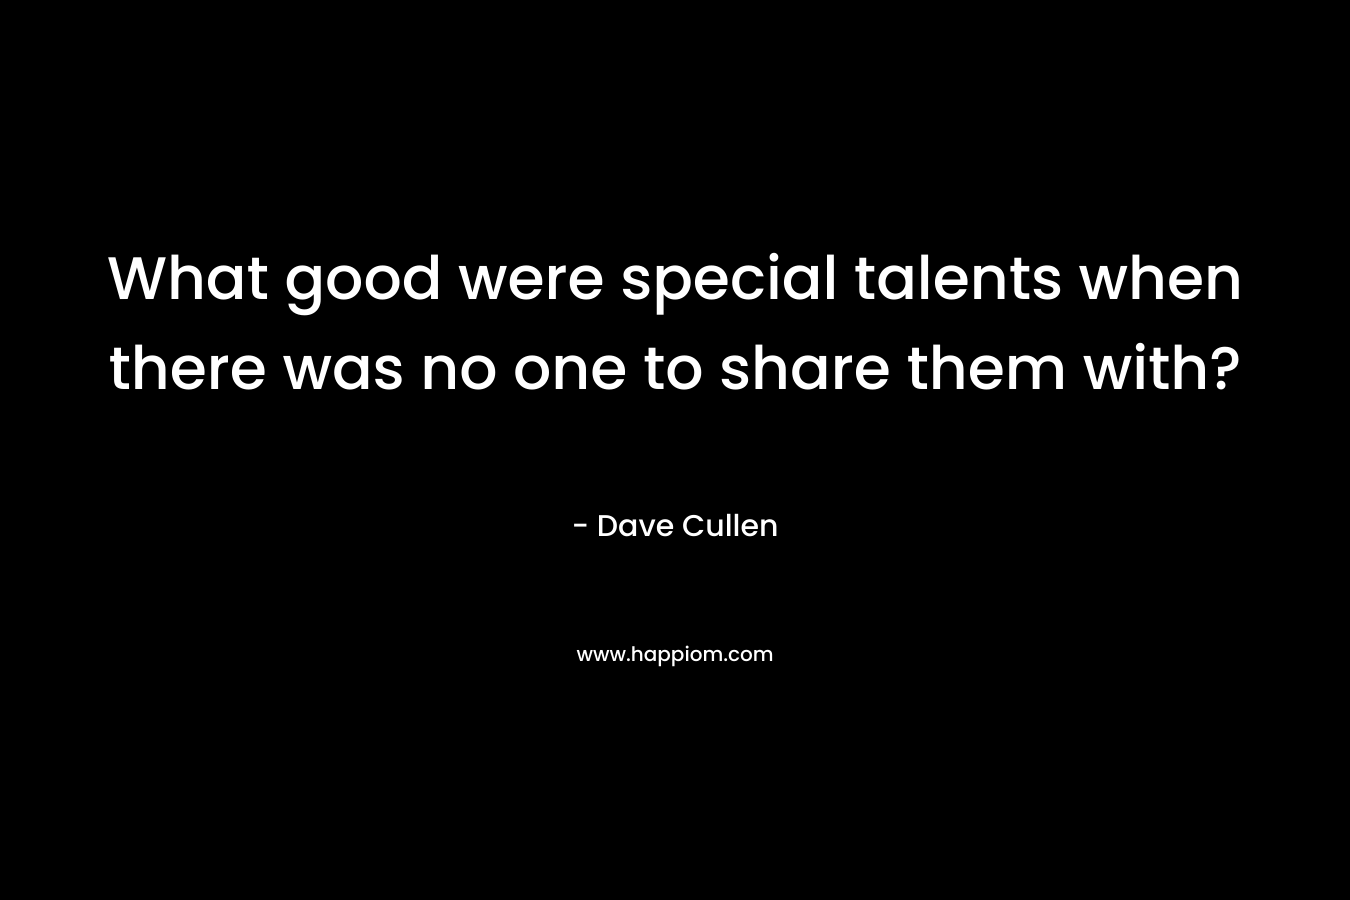 What good were special talents when there was no one to share them with?